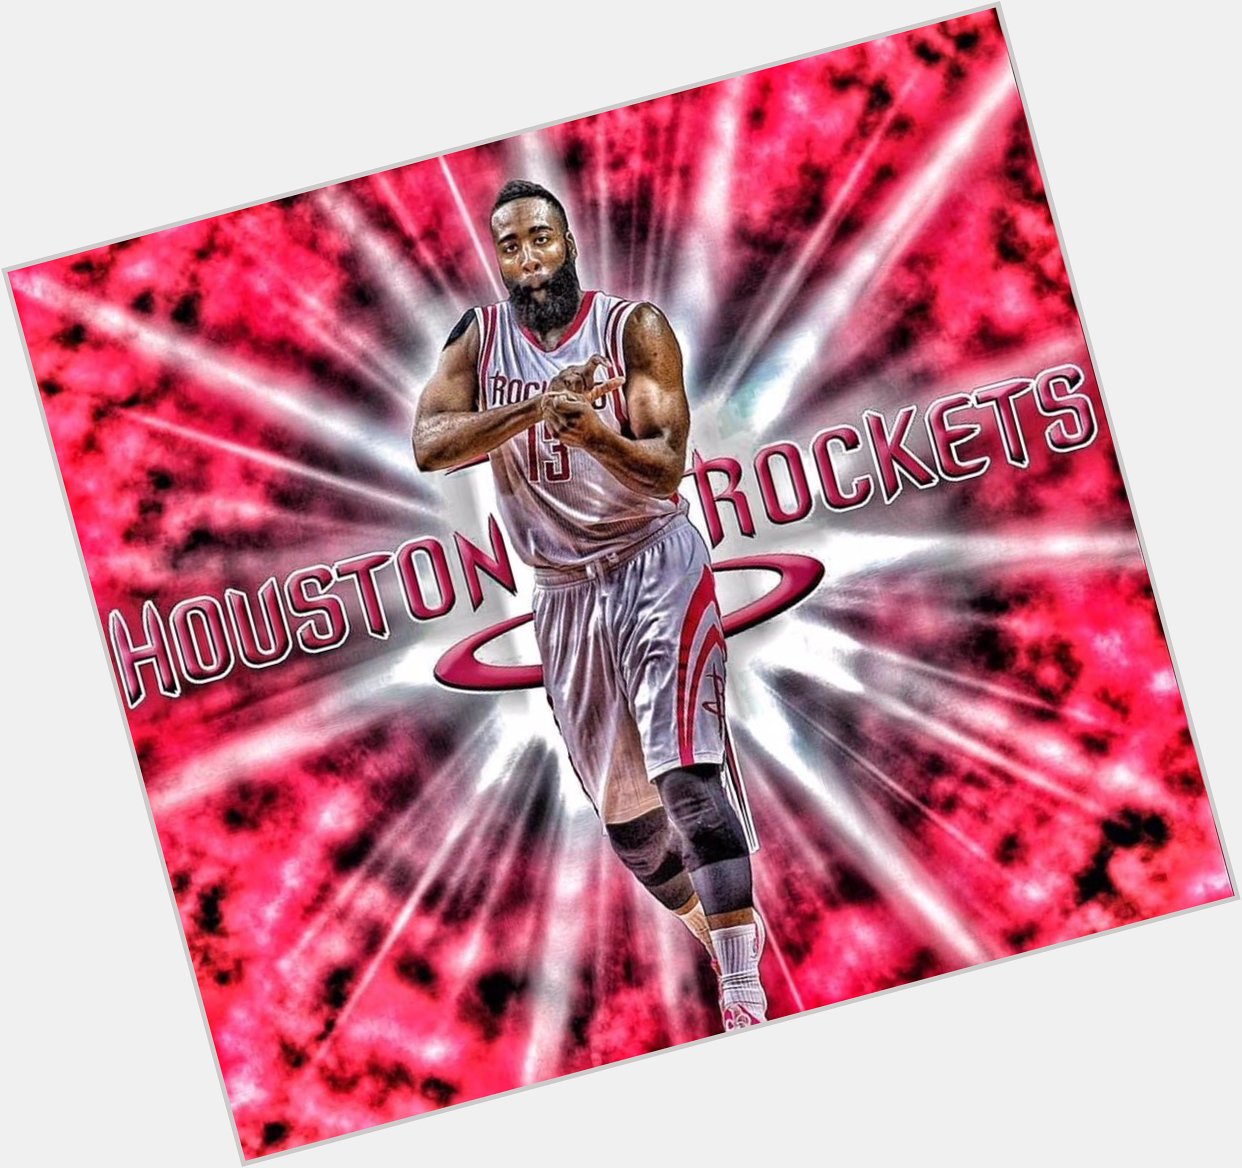  Hi James Harden happy birthday to you and the best wish for you 